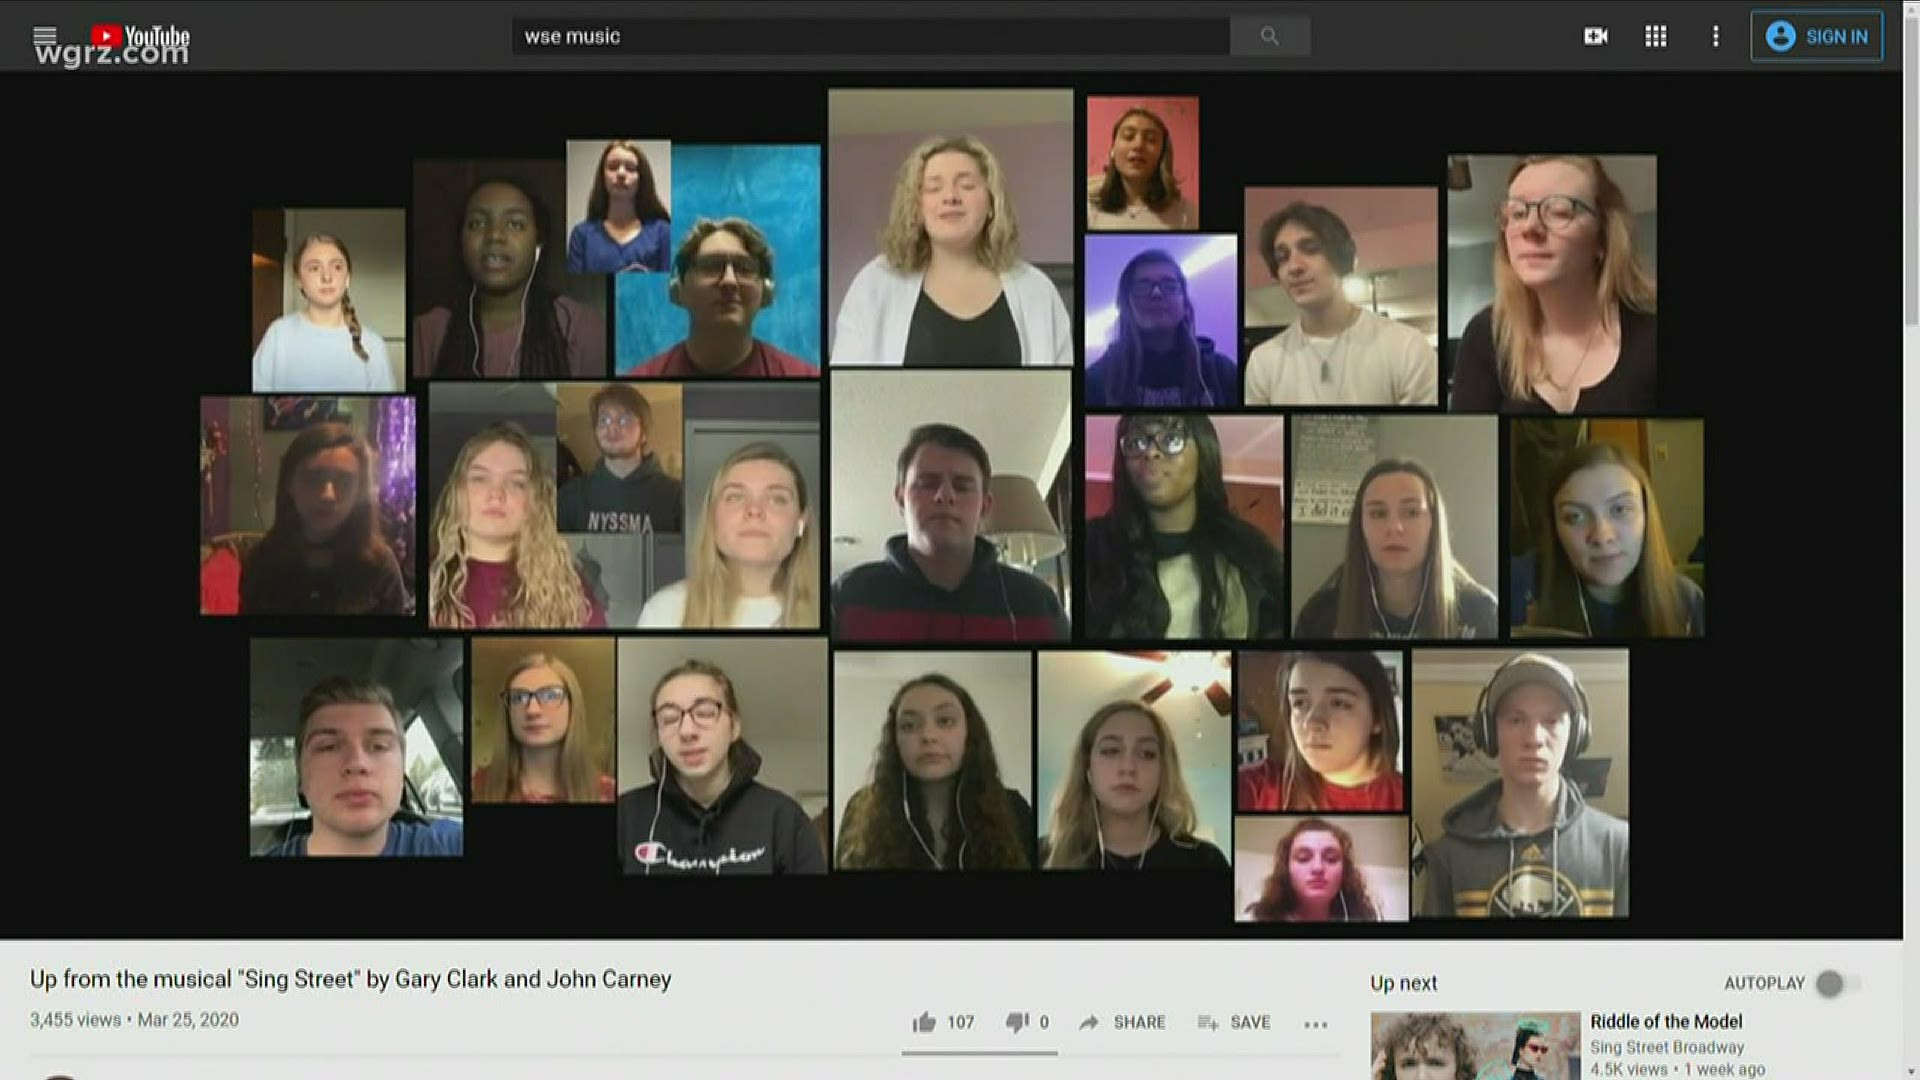 Each student in the West Seneca East chorus performed their part for a song called "Up" from the musical "Sing Street," which was later edited together.